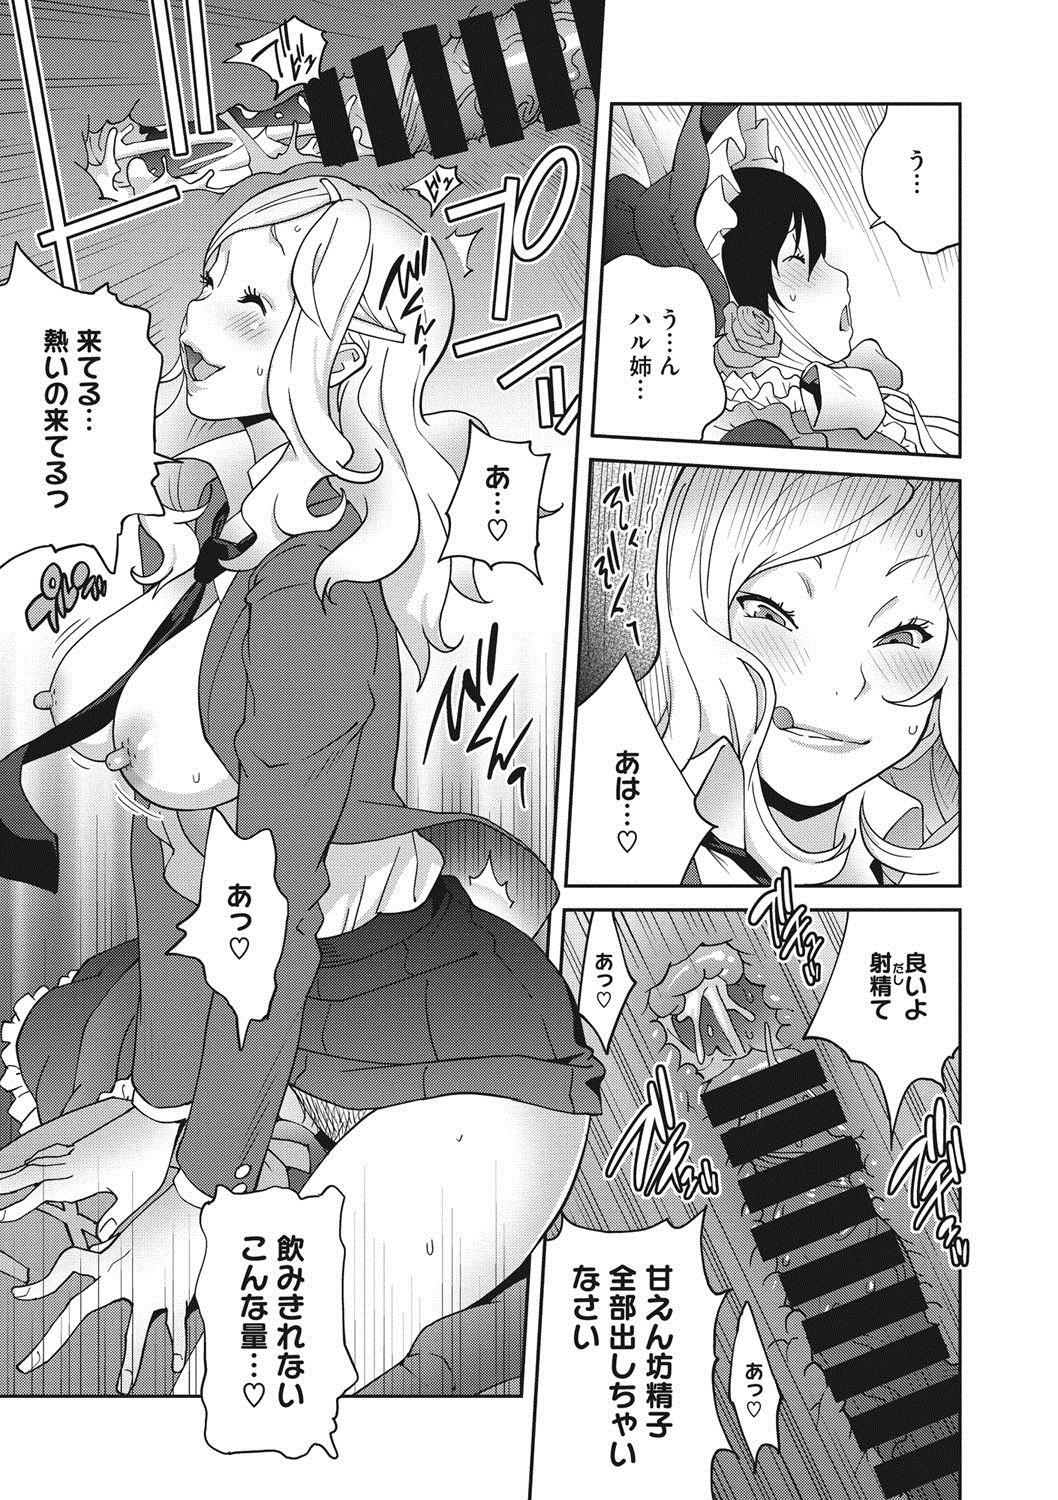 [Kotoyoshi Yumisuke] Haha to Ane to Aoi Ichigo no Fromage - Fromage of mother and an older sister and a blue strawberry Ch. 1-4 52